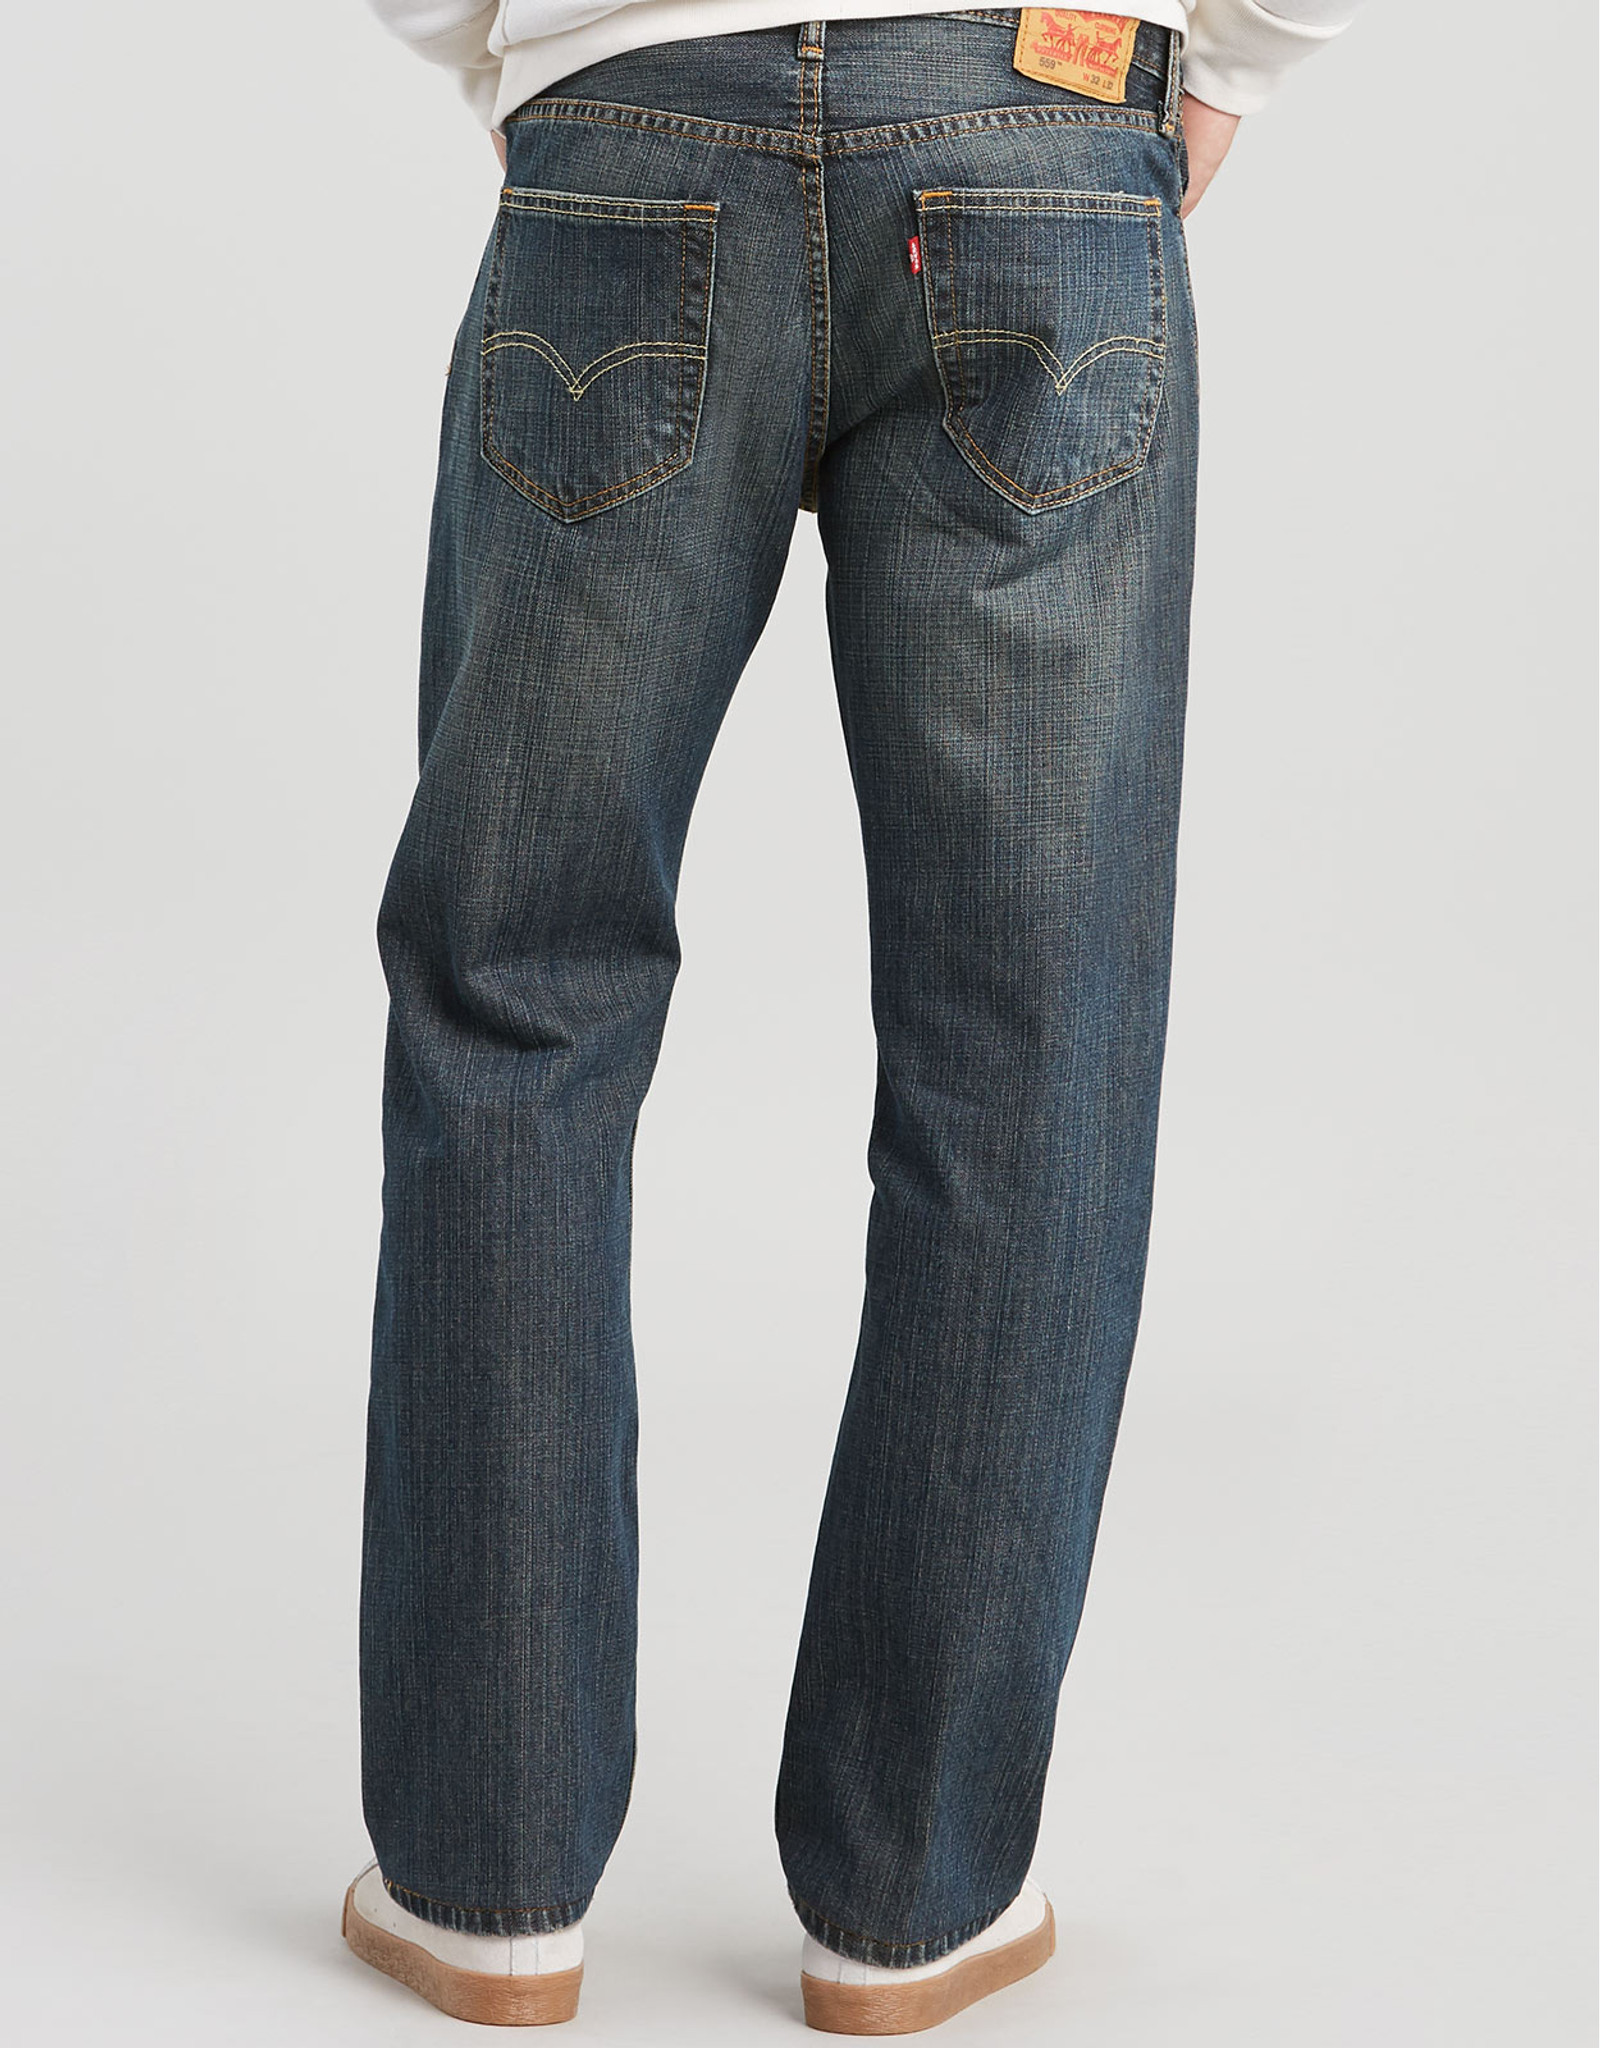 Levi's Men's 559 Relaxed Straight Low Rise Relaxed Fit Straight Leg Jeans - Range (Big & Tall)